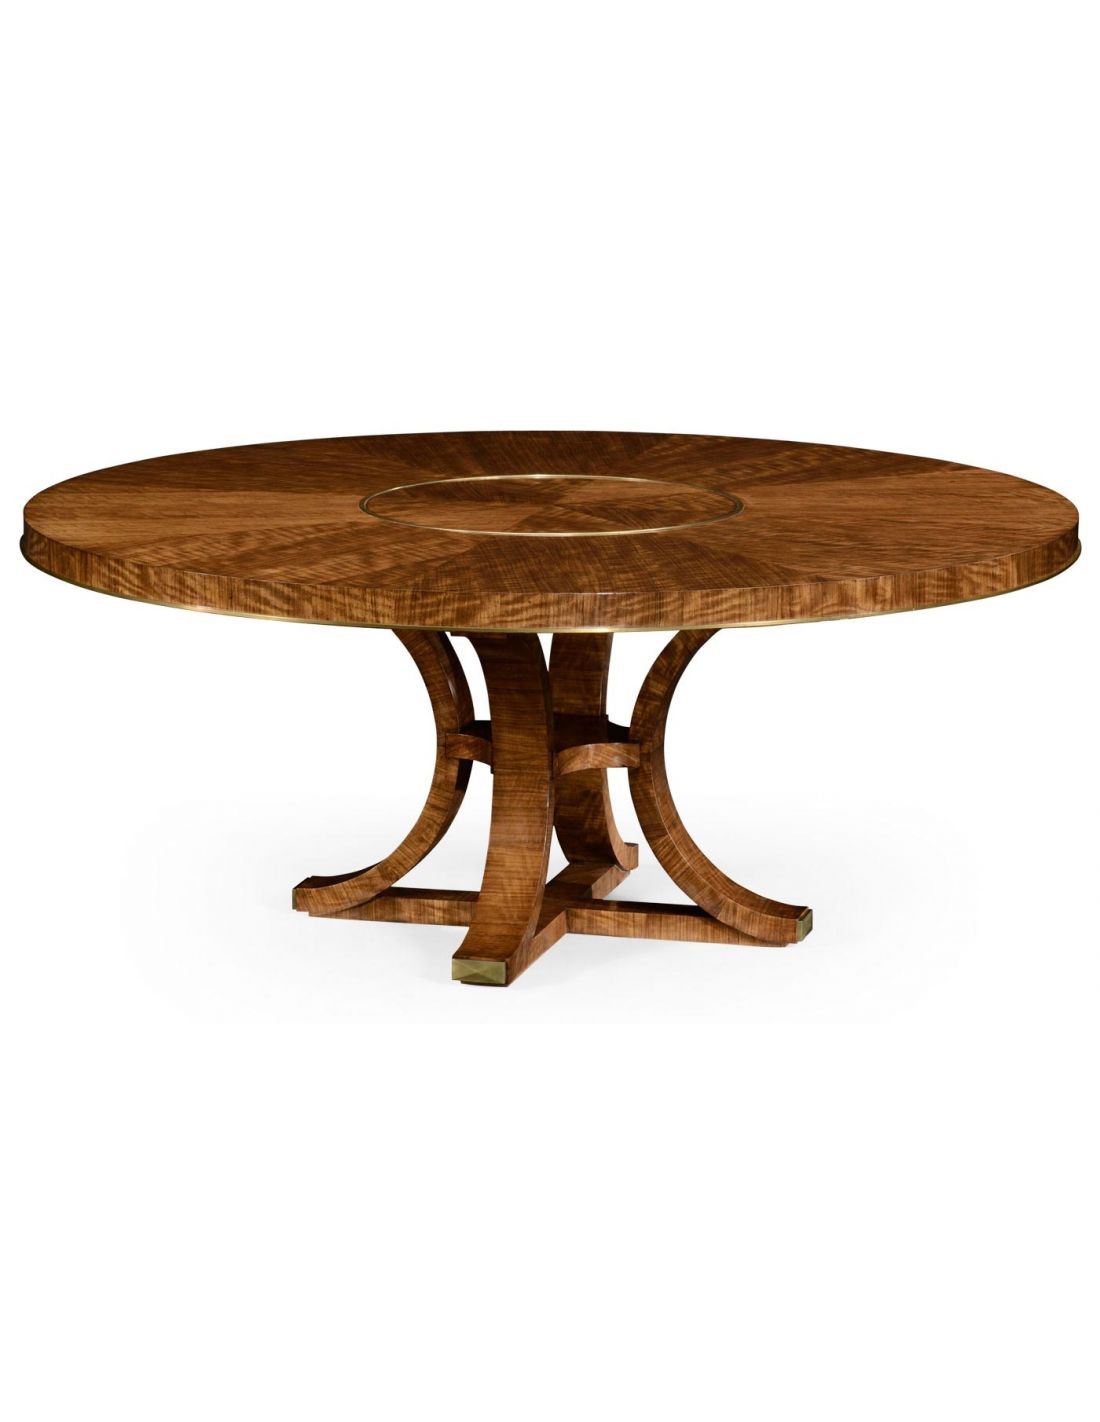 Circular Dining Table With In Built, Round Kitchen Table With Built In Lazy Susan